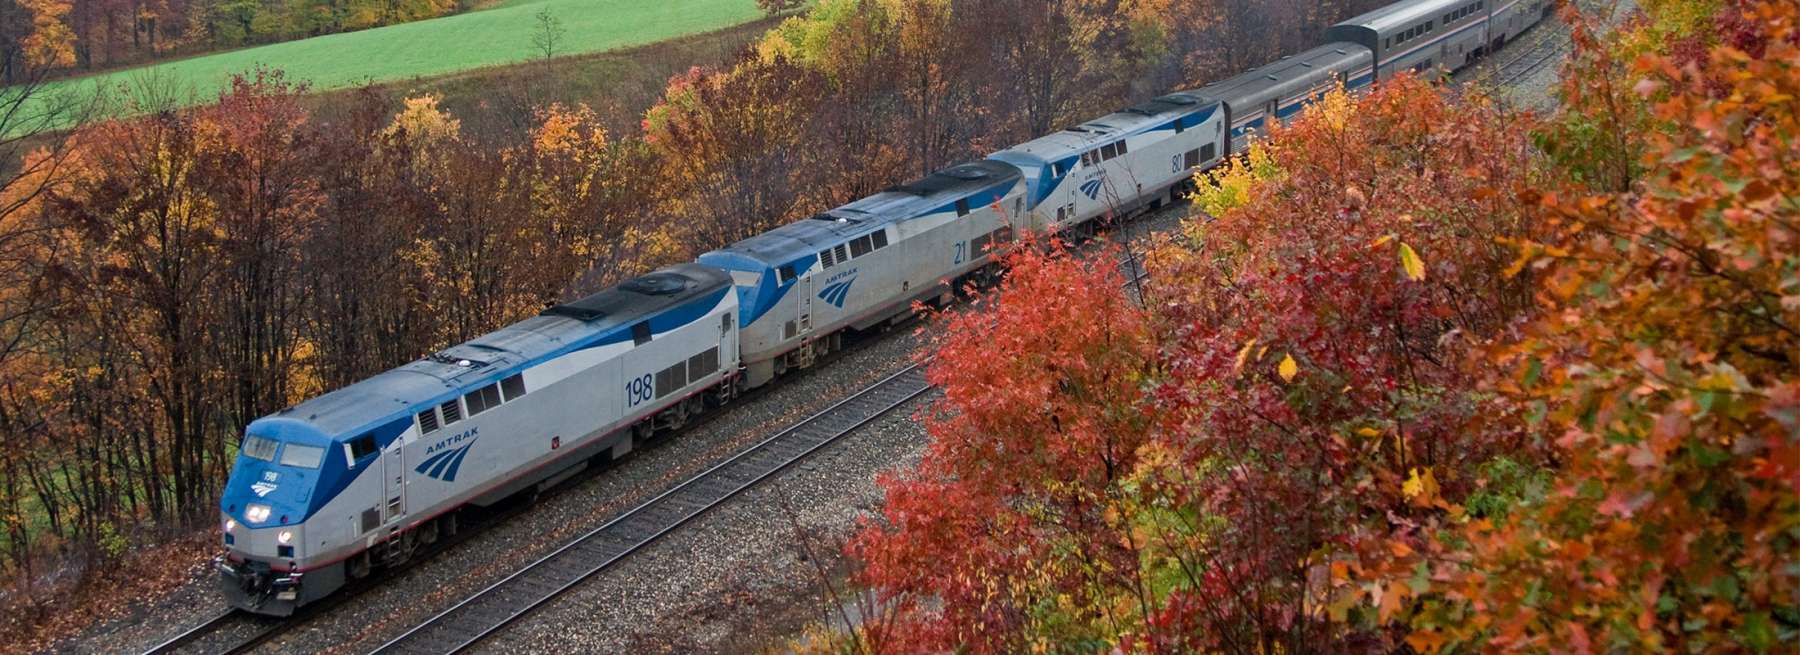 Rhode Island News: Amtrak and Climate Change?